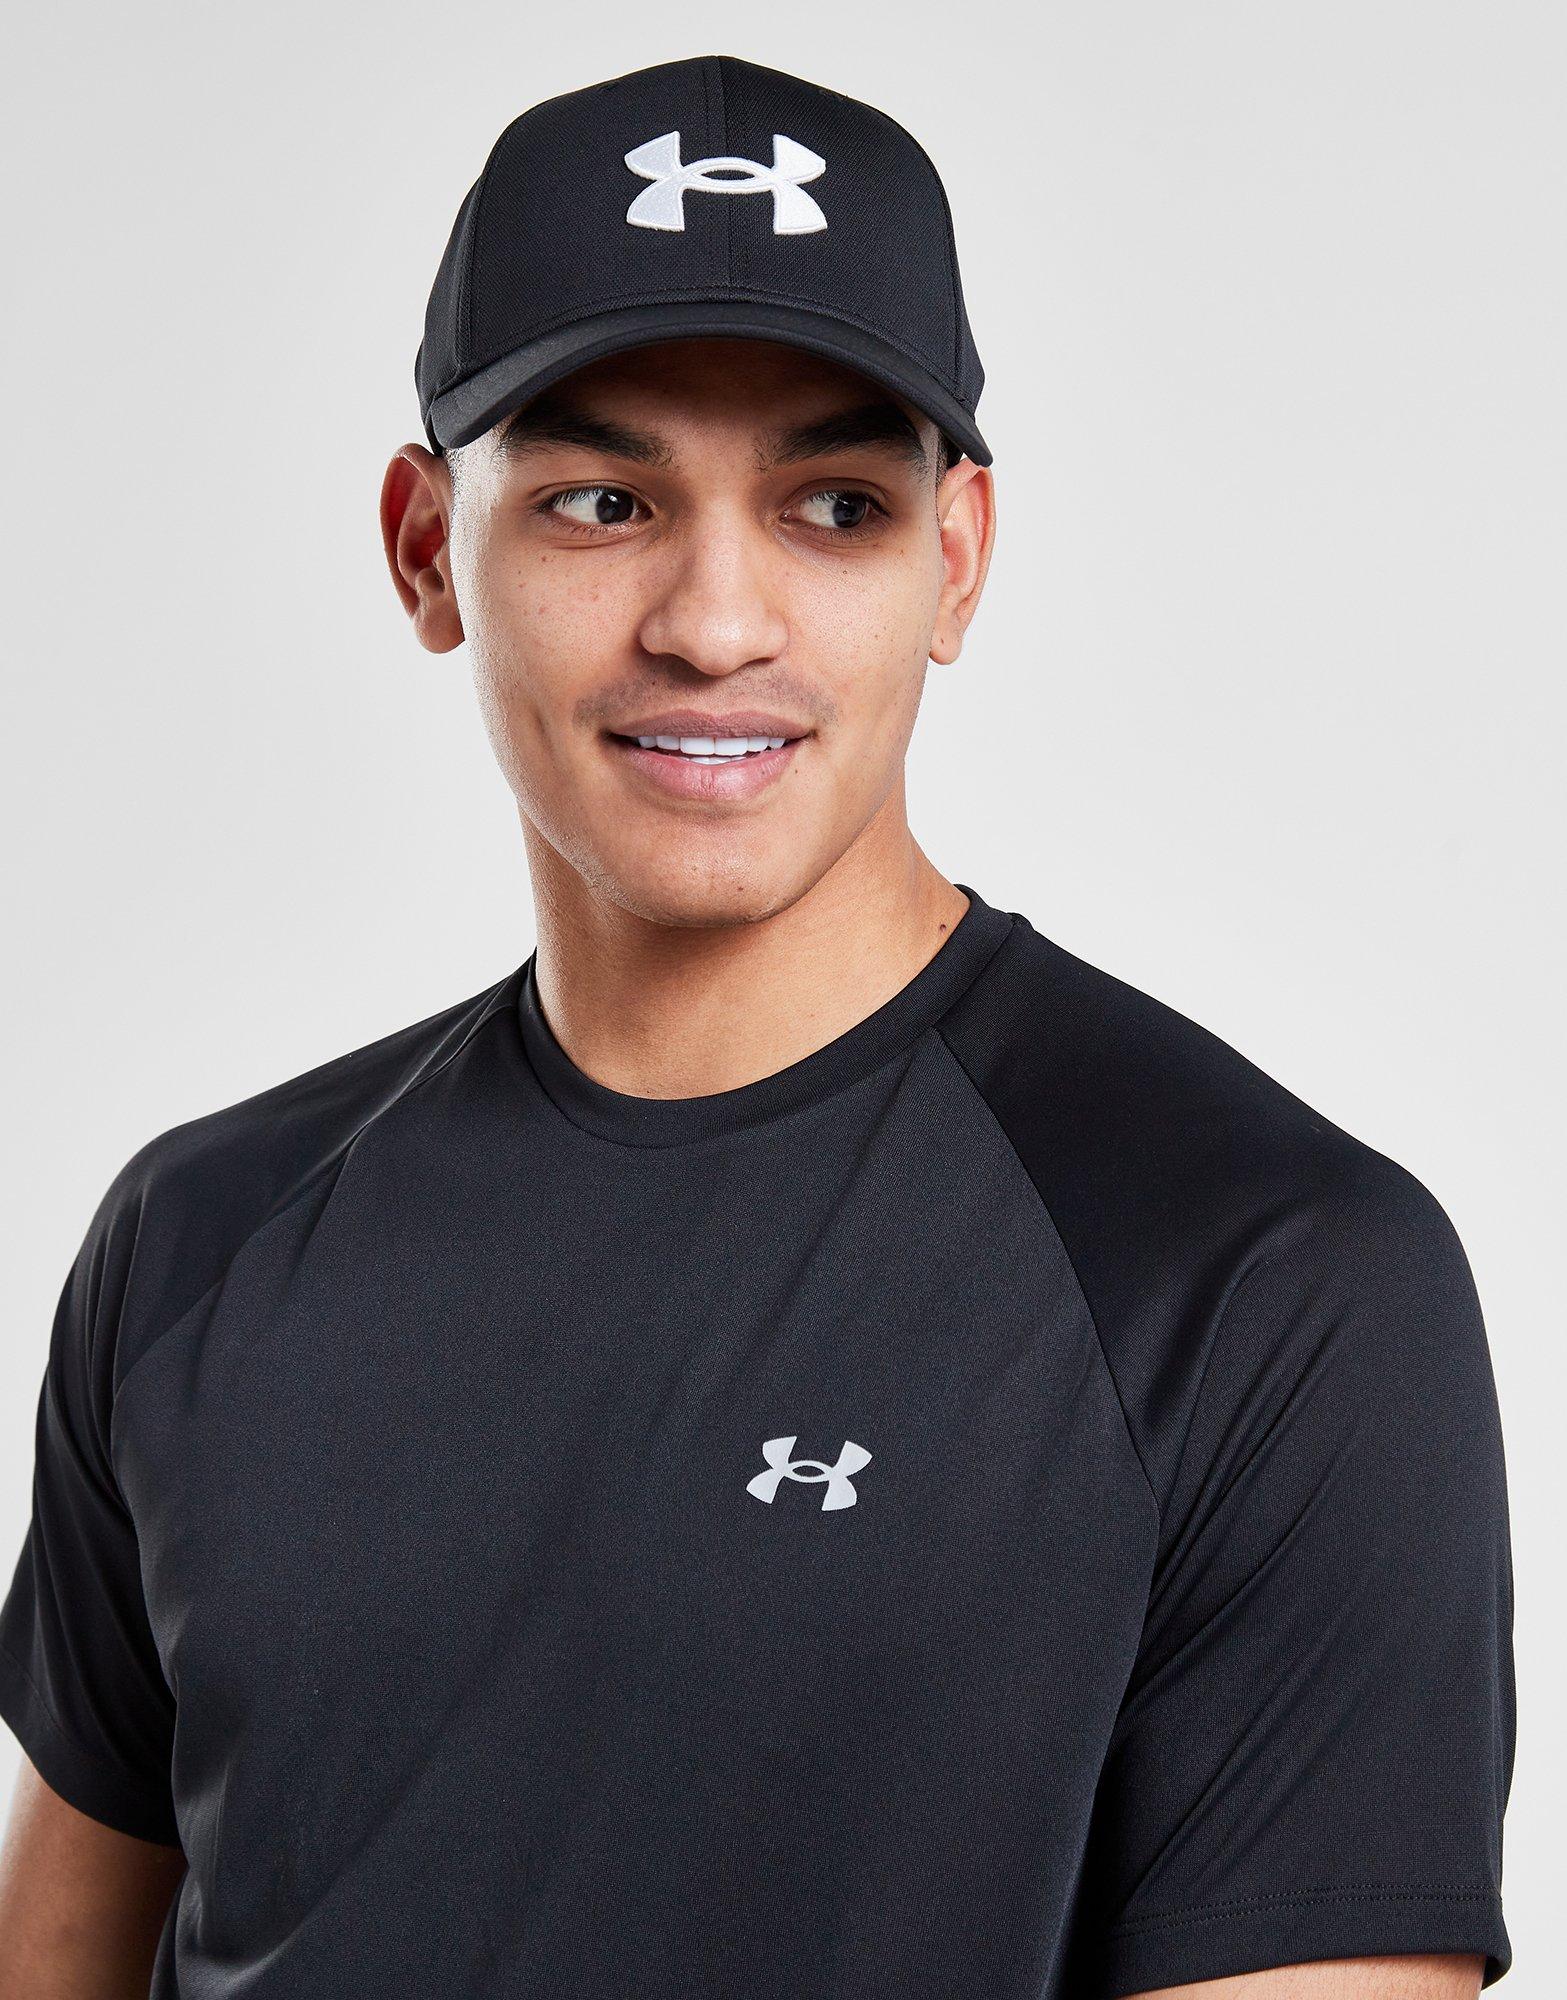 Under Armour Gorra Mujer Play Up Cap negro